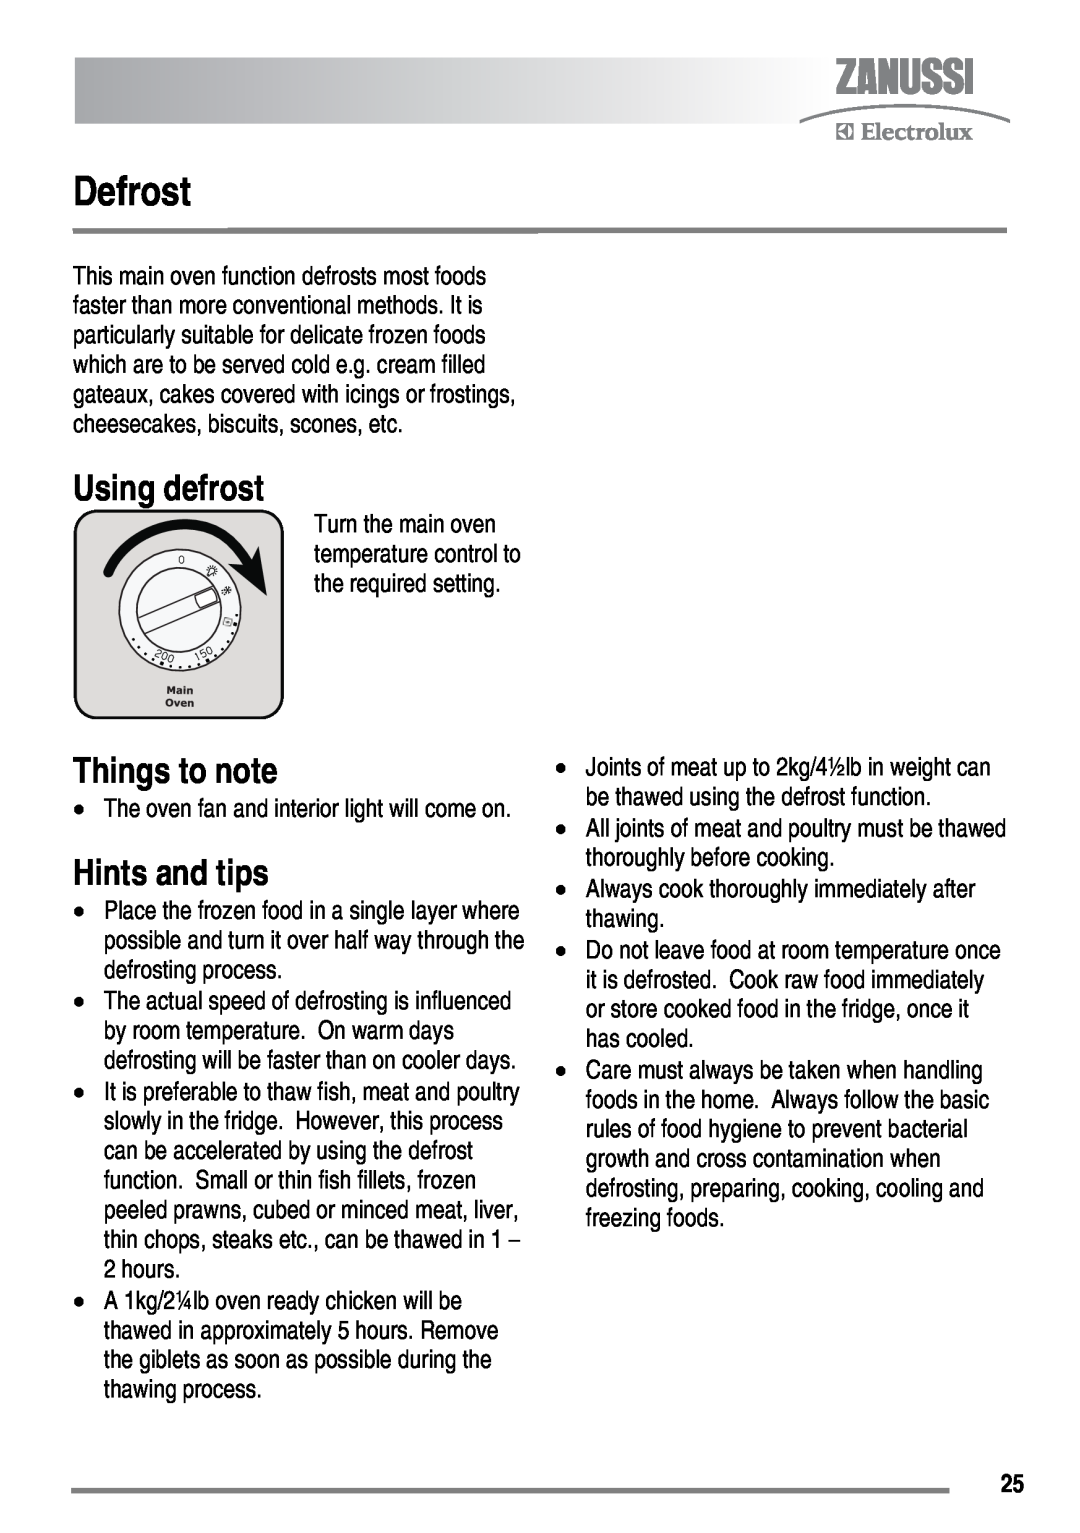 Zanussi ZKM6040 user manual Defrost, Using defrost, Things to note, Hints and tips 